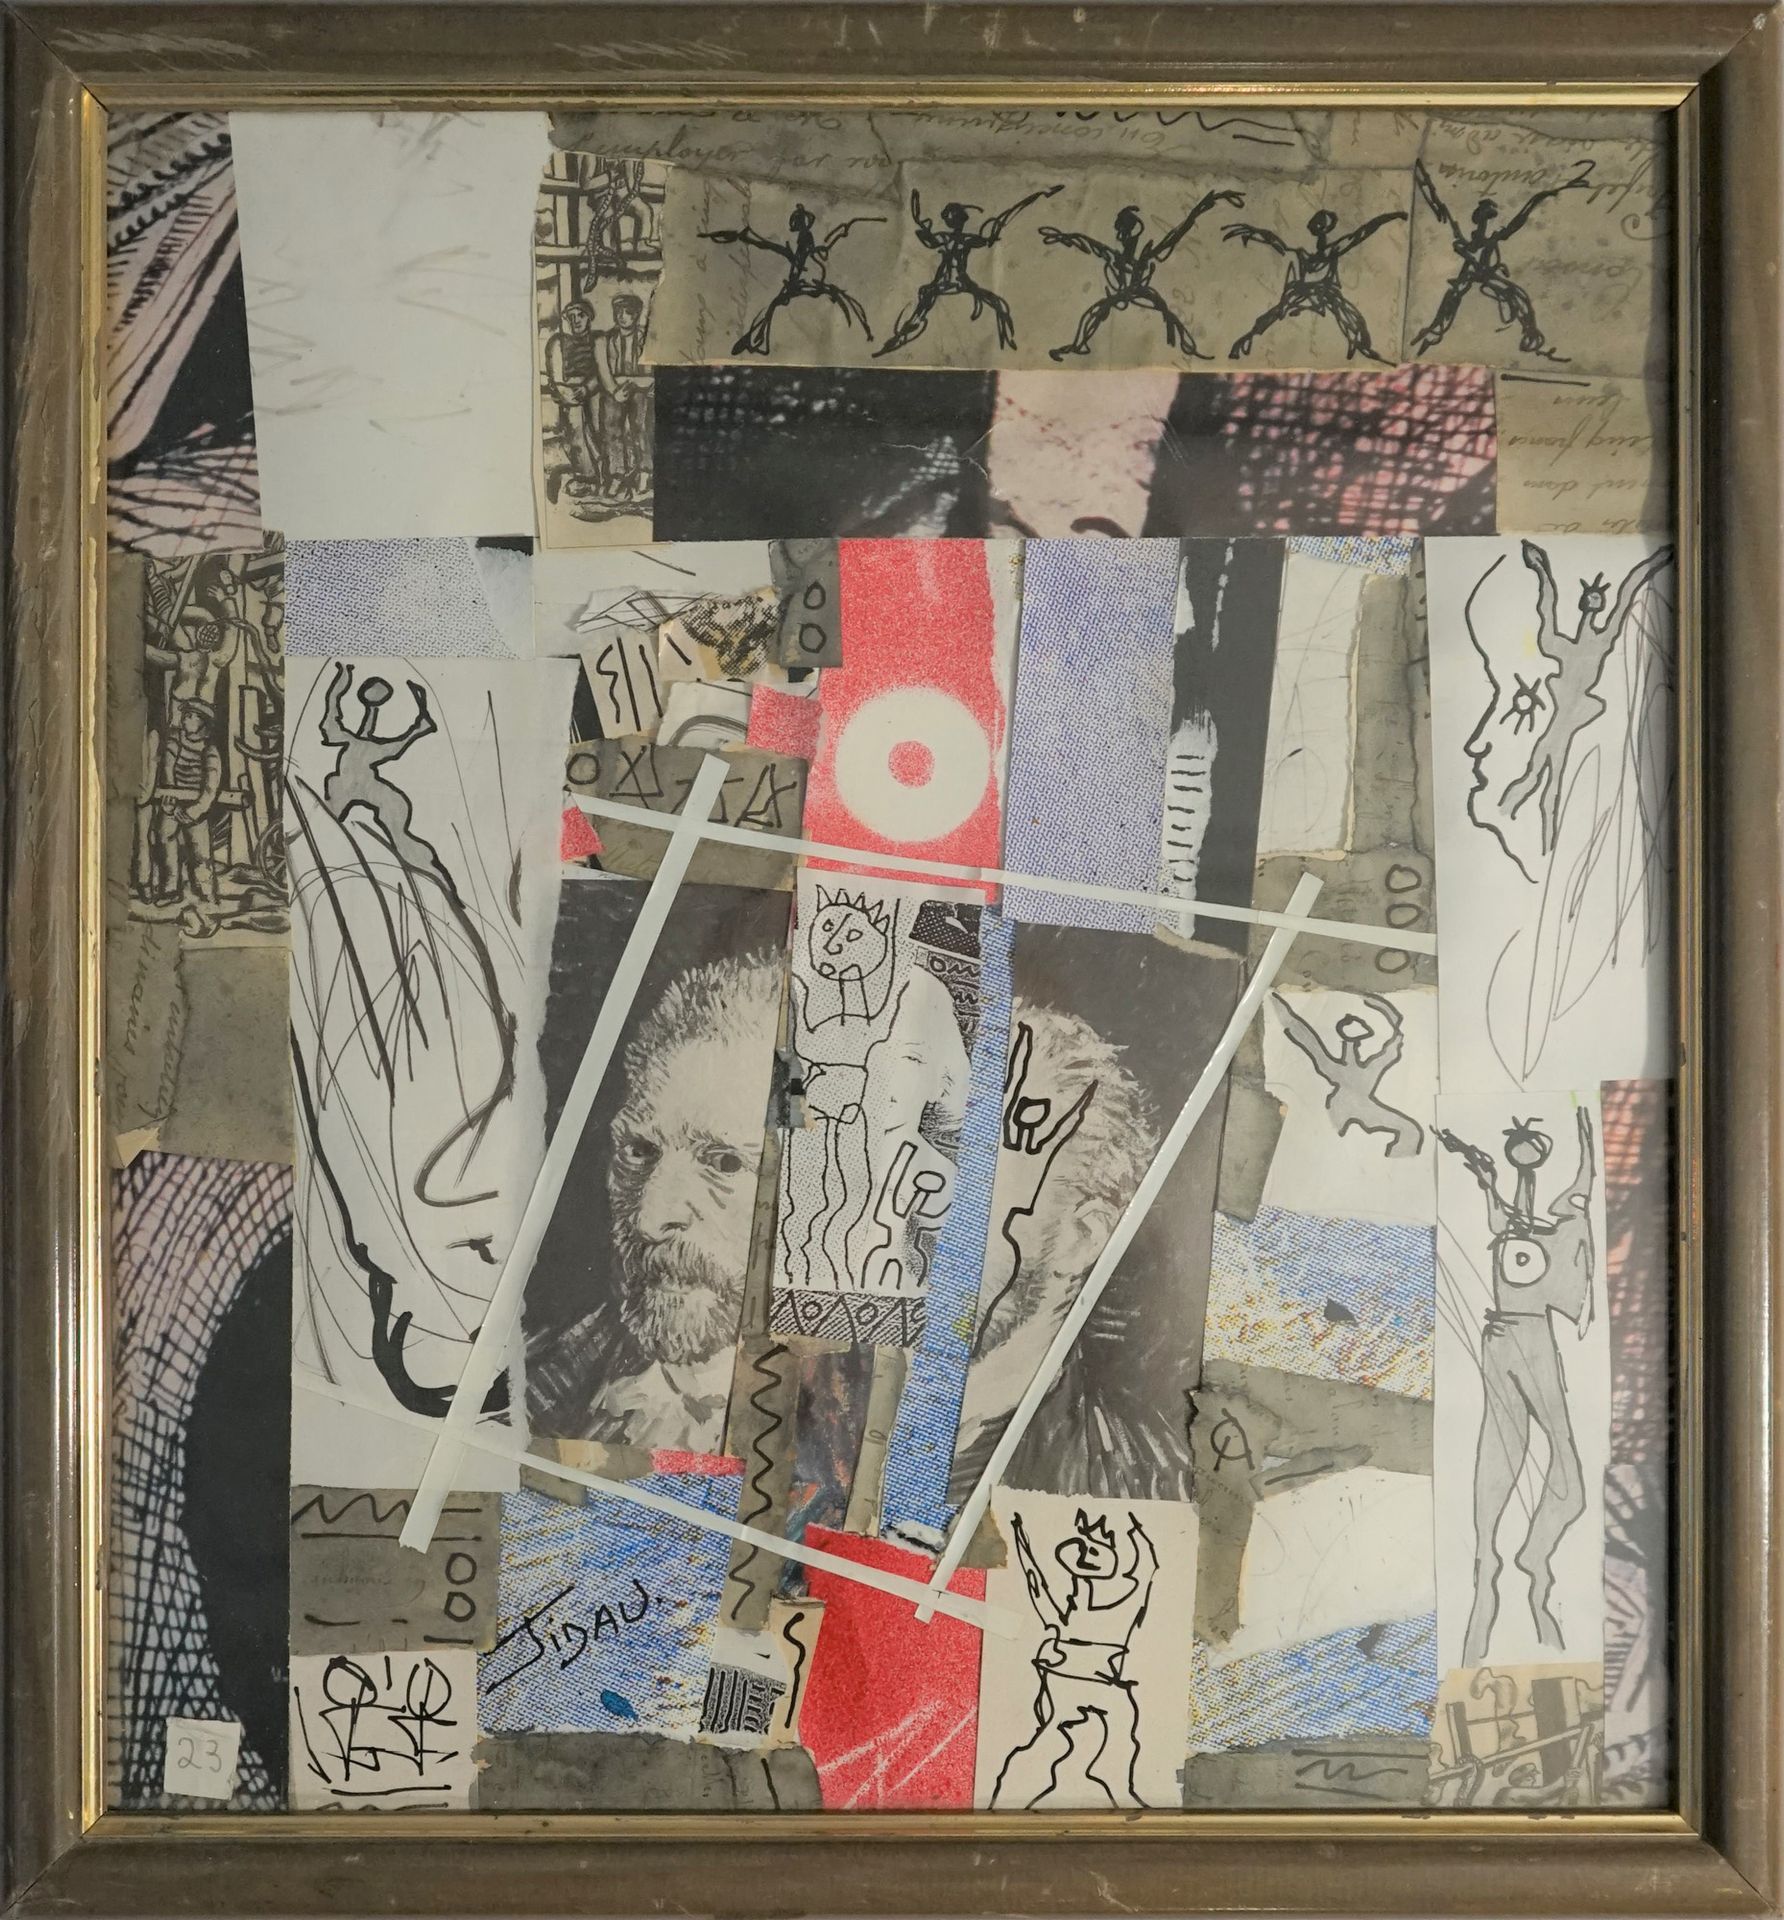 Null JIDAU "Vincent (2)", 1994, mixed media. 32.5x30cm. Signed lower left.